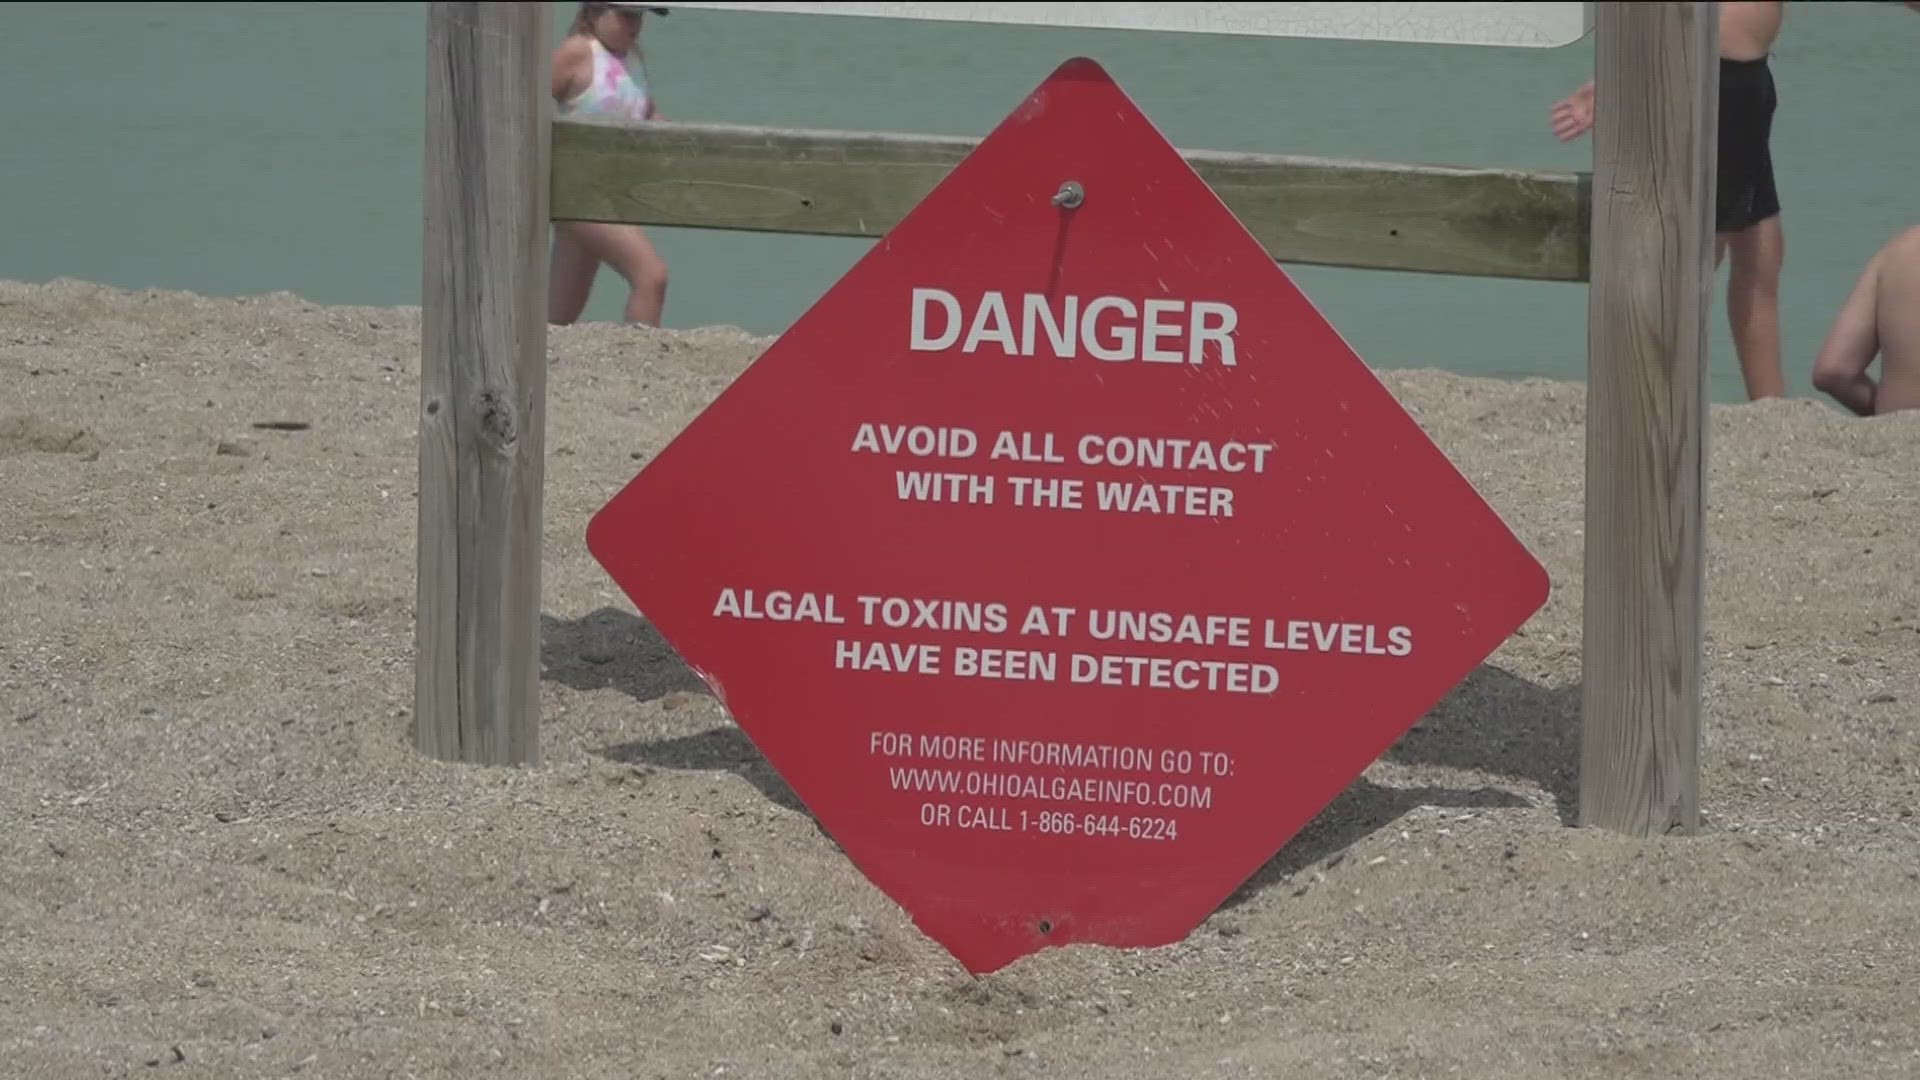 The advisory will remain in effect until cyanotoxin levels are below recreational thresholds, officials said Wednesday.